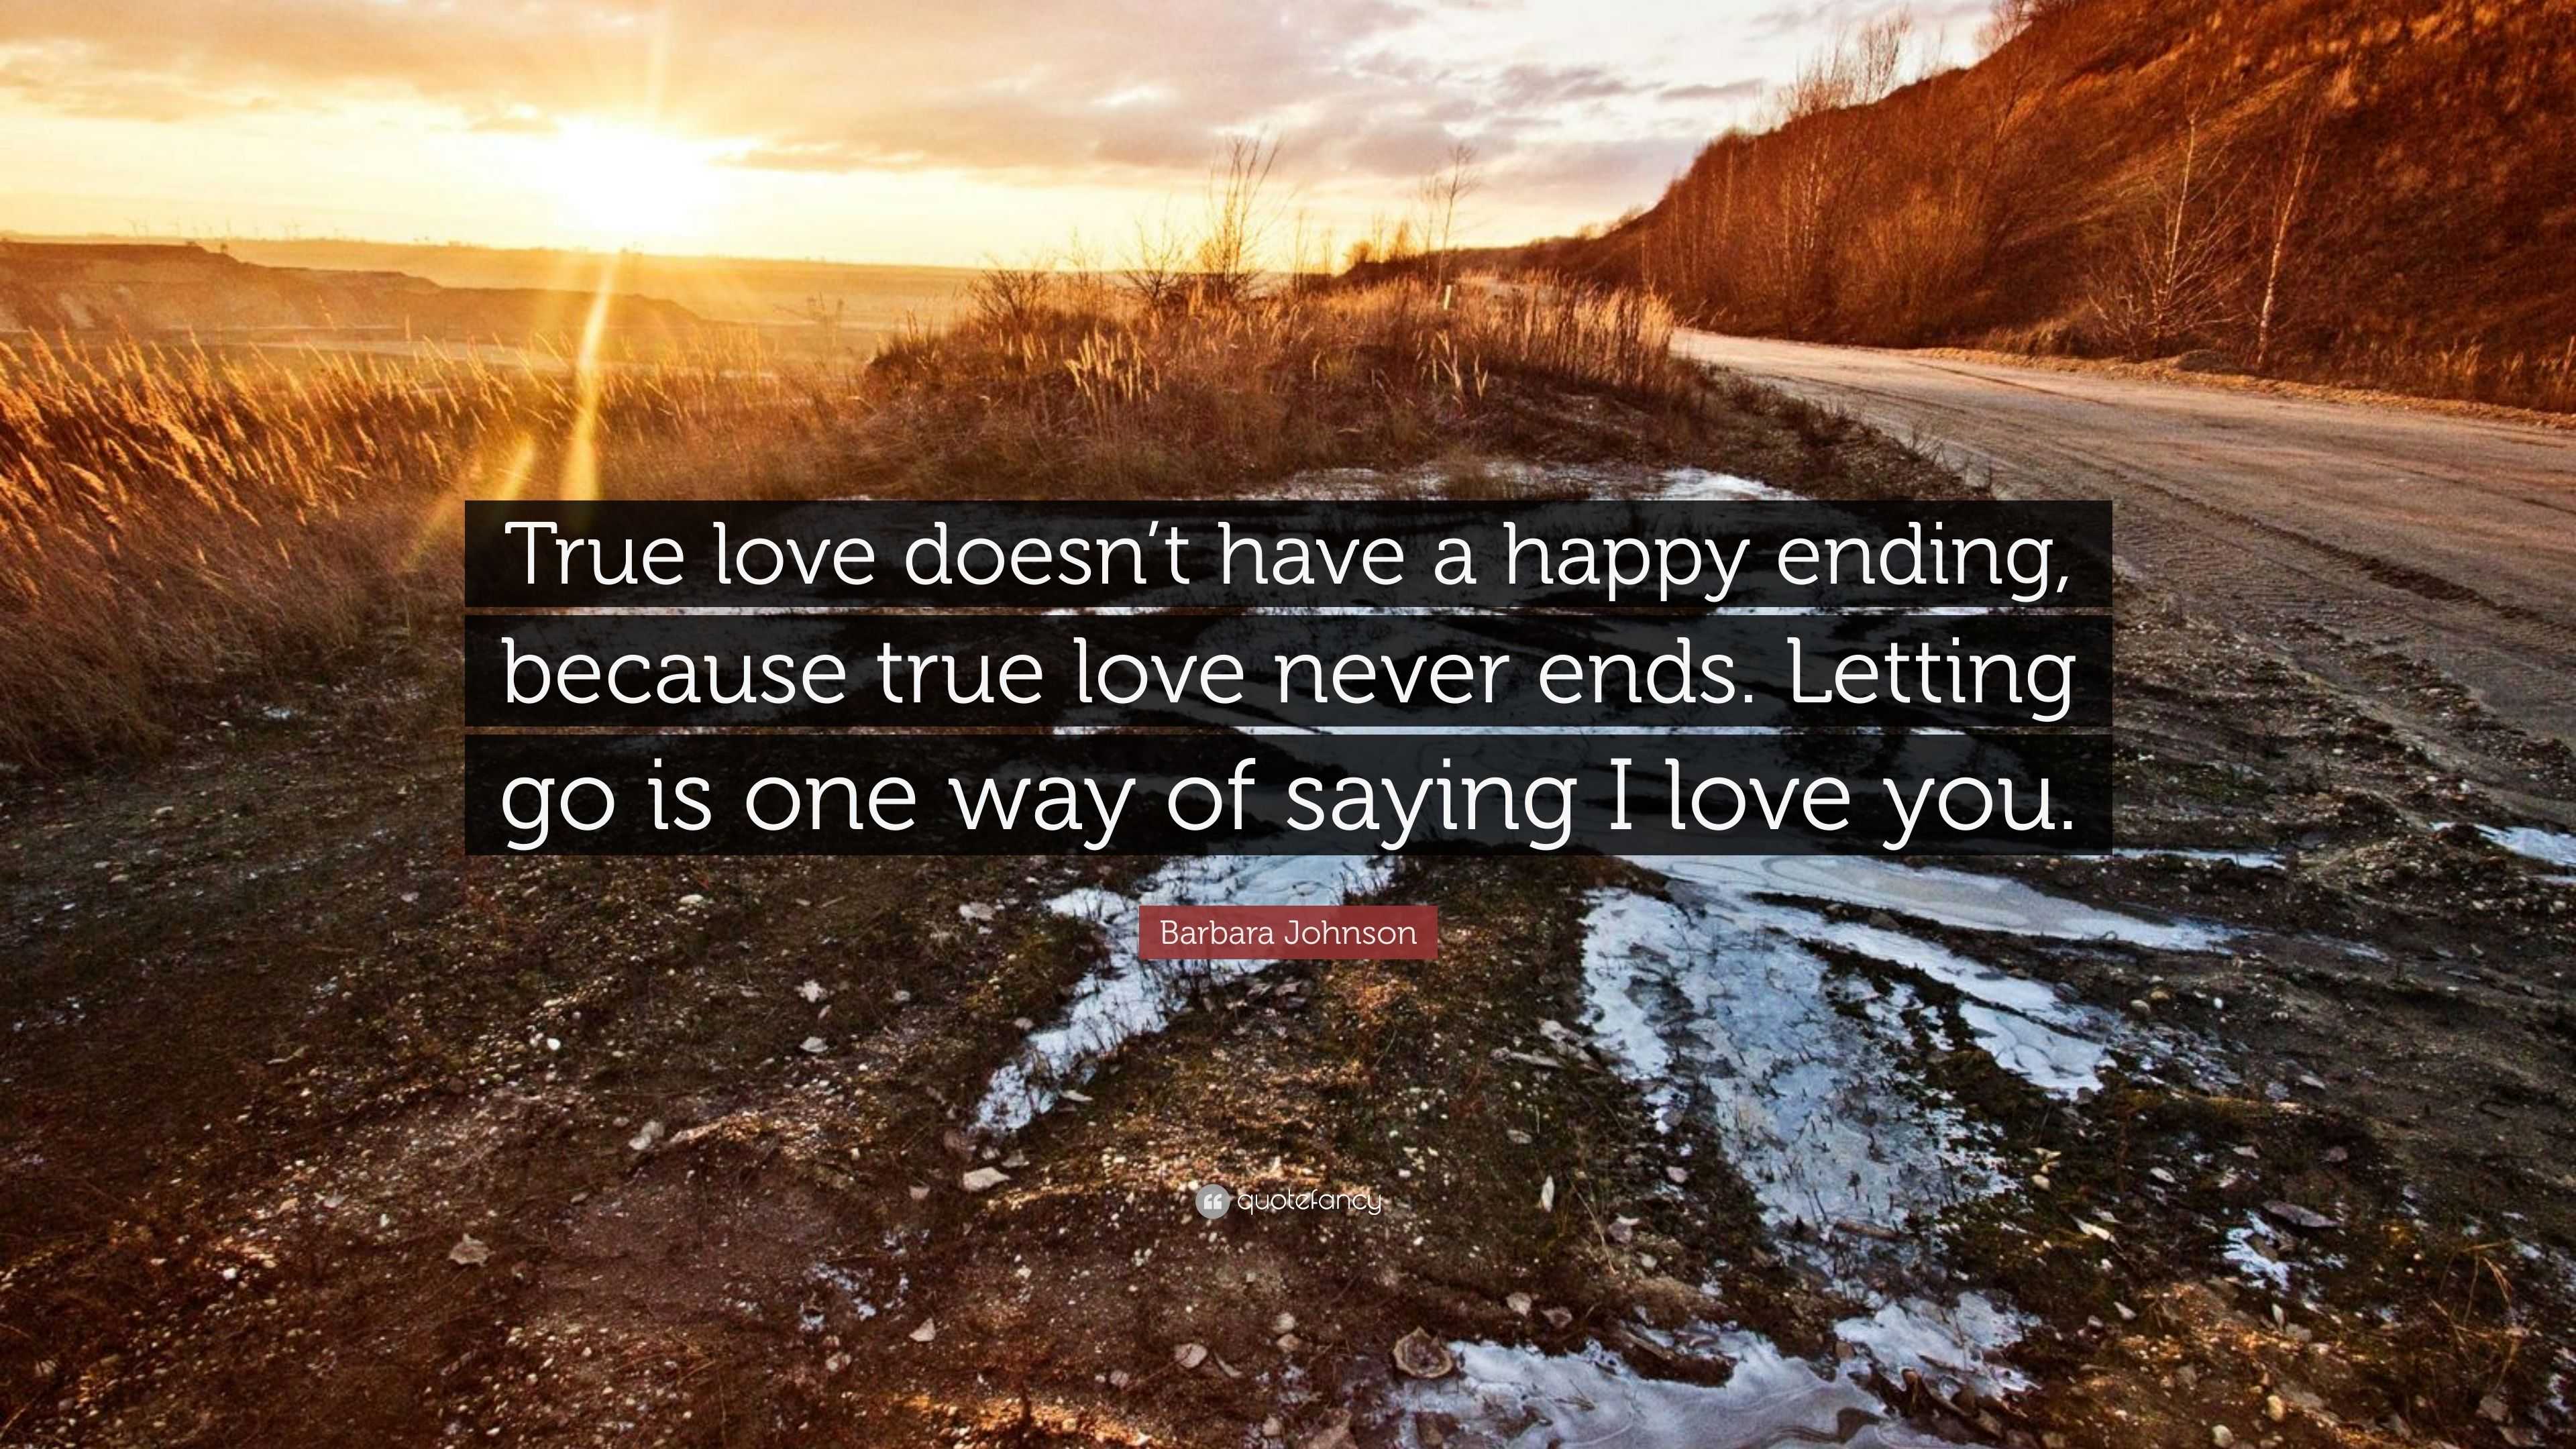 True love end independent film #truelove #anwithacreations #love